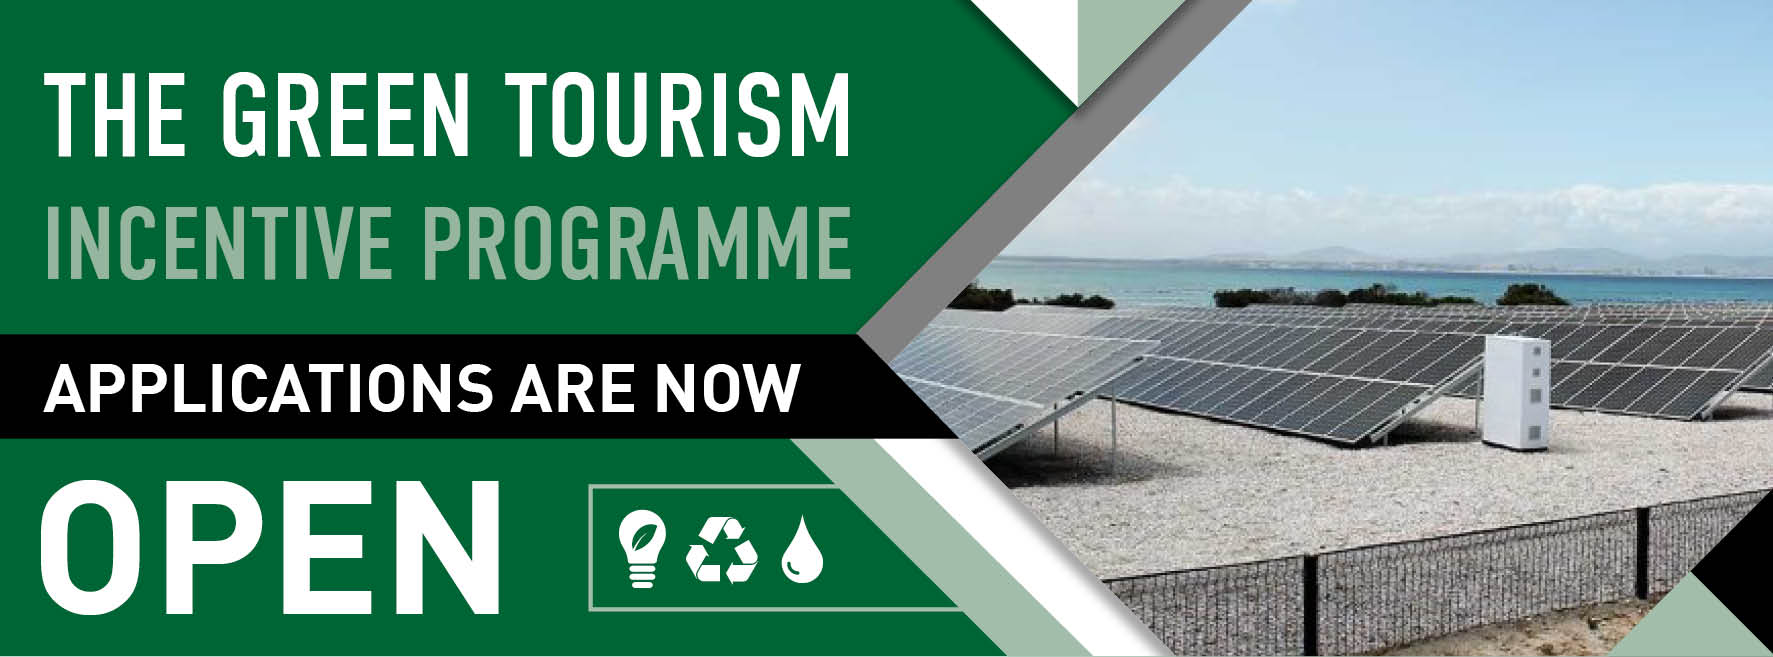 Tourism celebrates the fifth year of its Green Tourism Incentive Programme